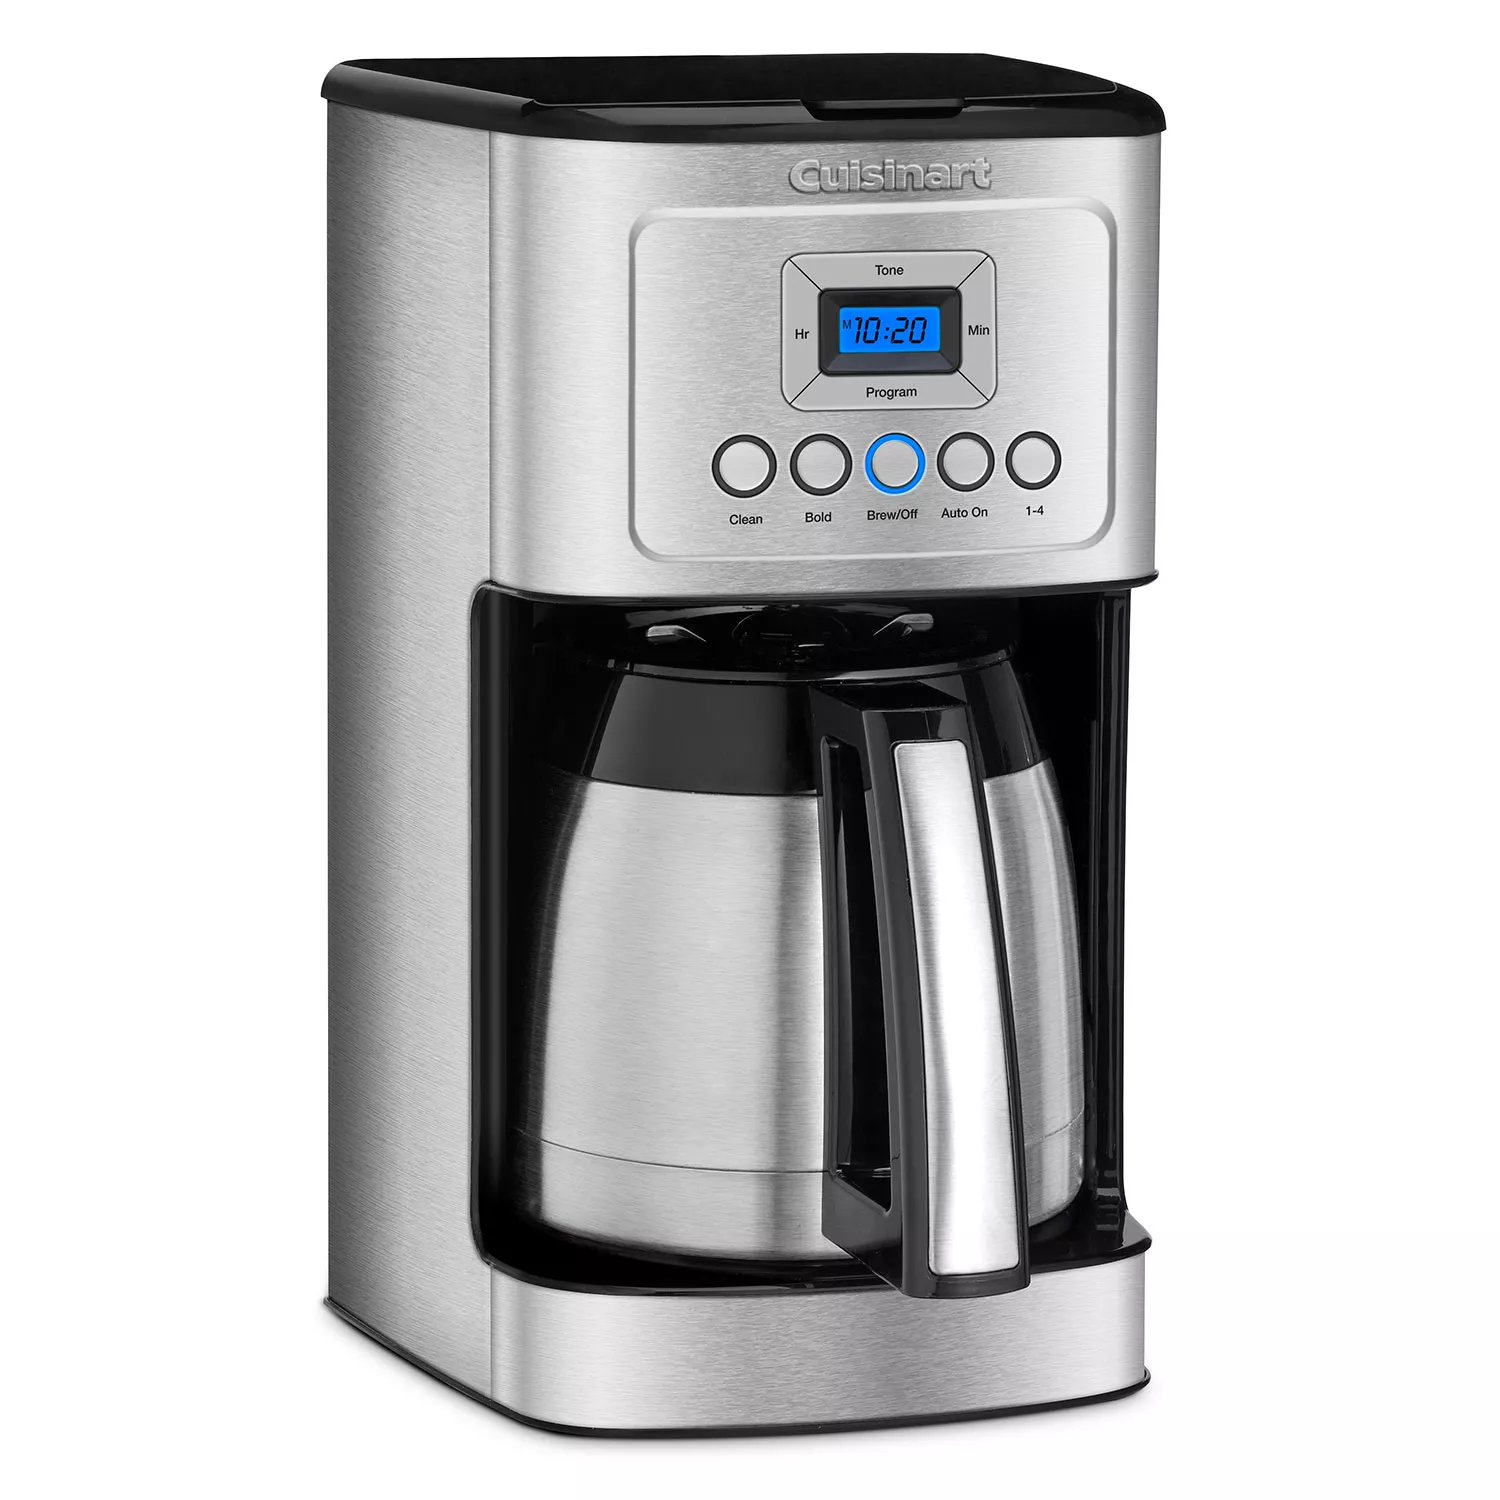 A Review of the Cuisinart Coffee Center Barista Bar 4-in-1 Coffeemaker -  Tested by Bob Vila